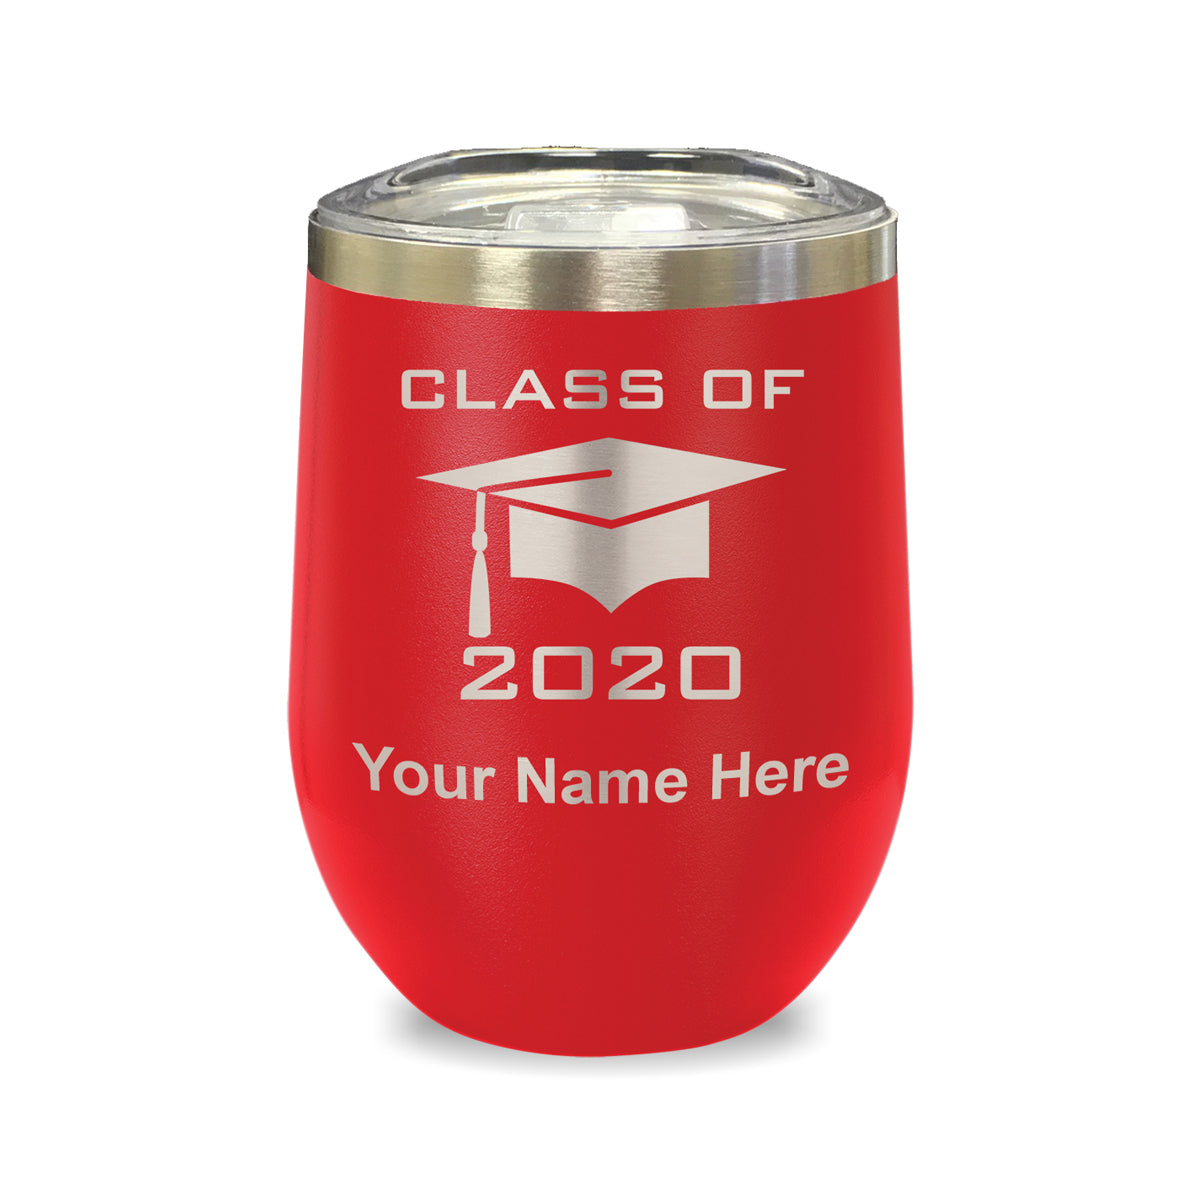 LaserGram Double Wall Stainless Steel Wine Glass, Grad Cap Class of 2020, 2021, 2022, 2023, 2024, 2025, Personalized Engraving Included